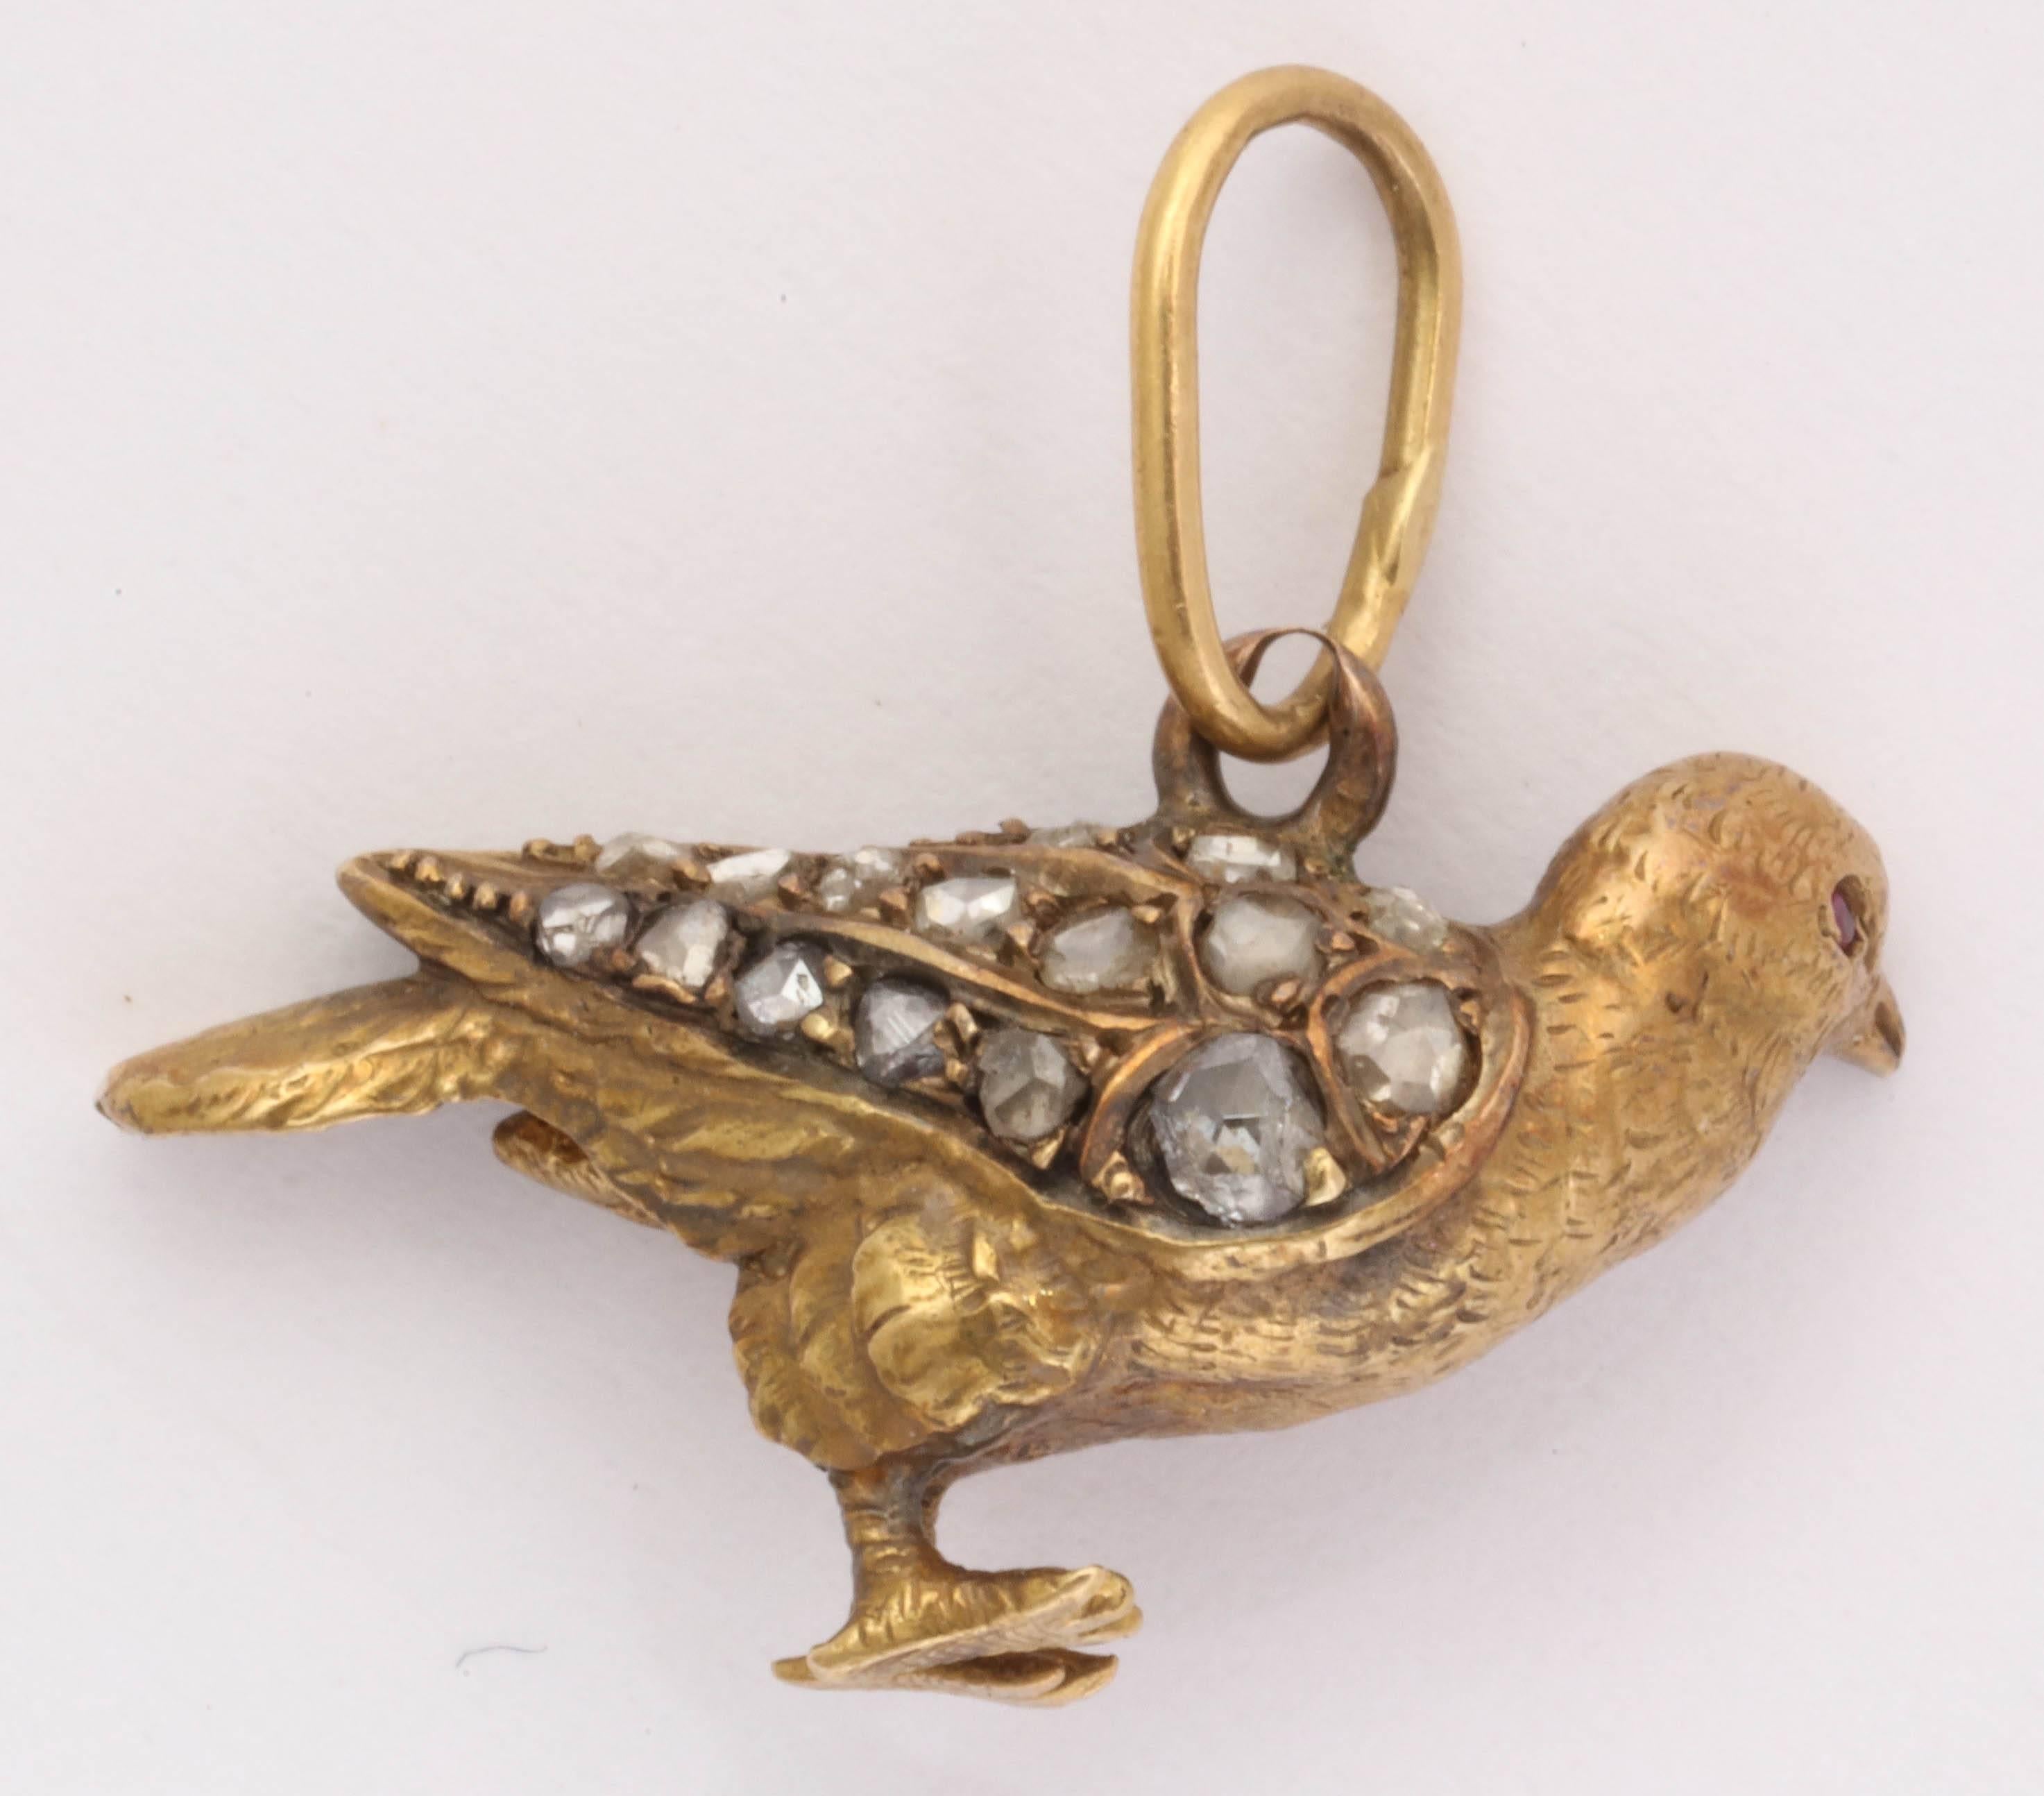 Unique and rare bird charm with rose cut diamonds on the wings and great detail in the carving. It is solid 18kt gold. The bale is a good size oval loop to accommodate a larger chain or cord.